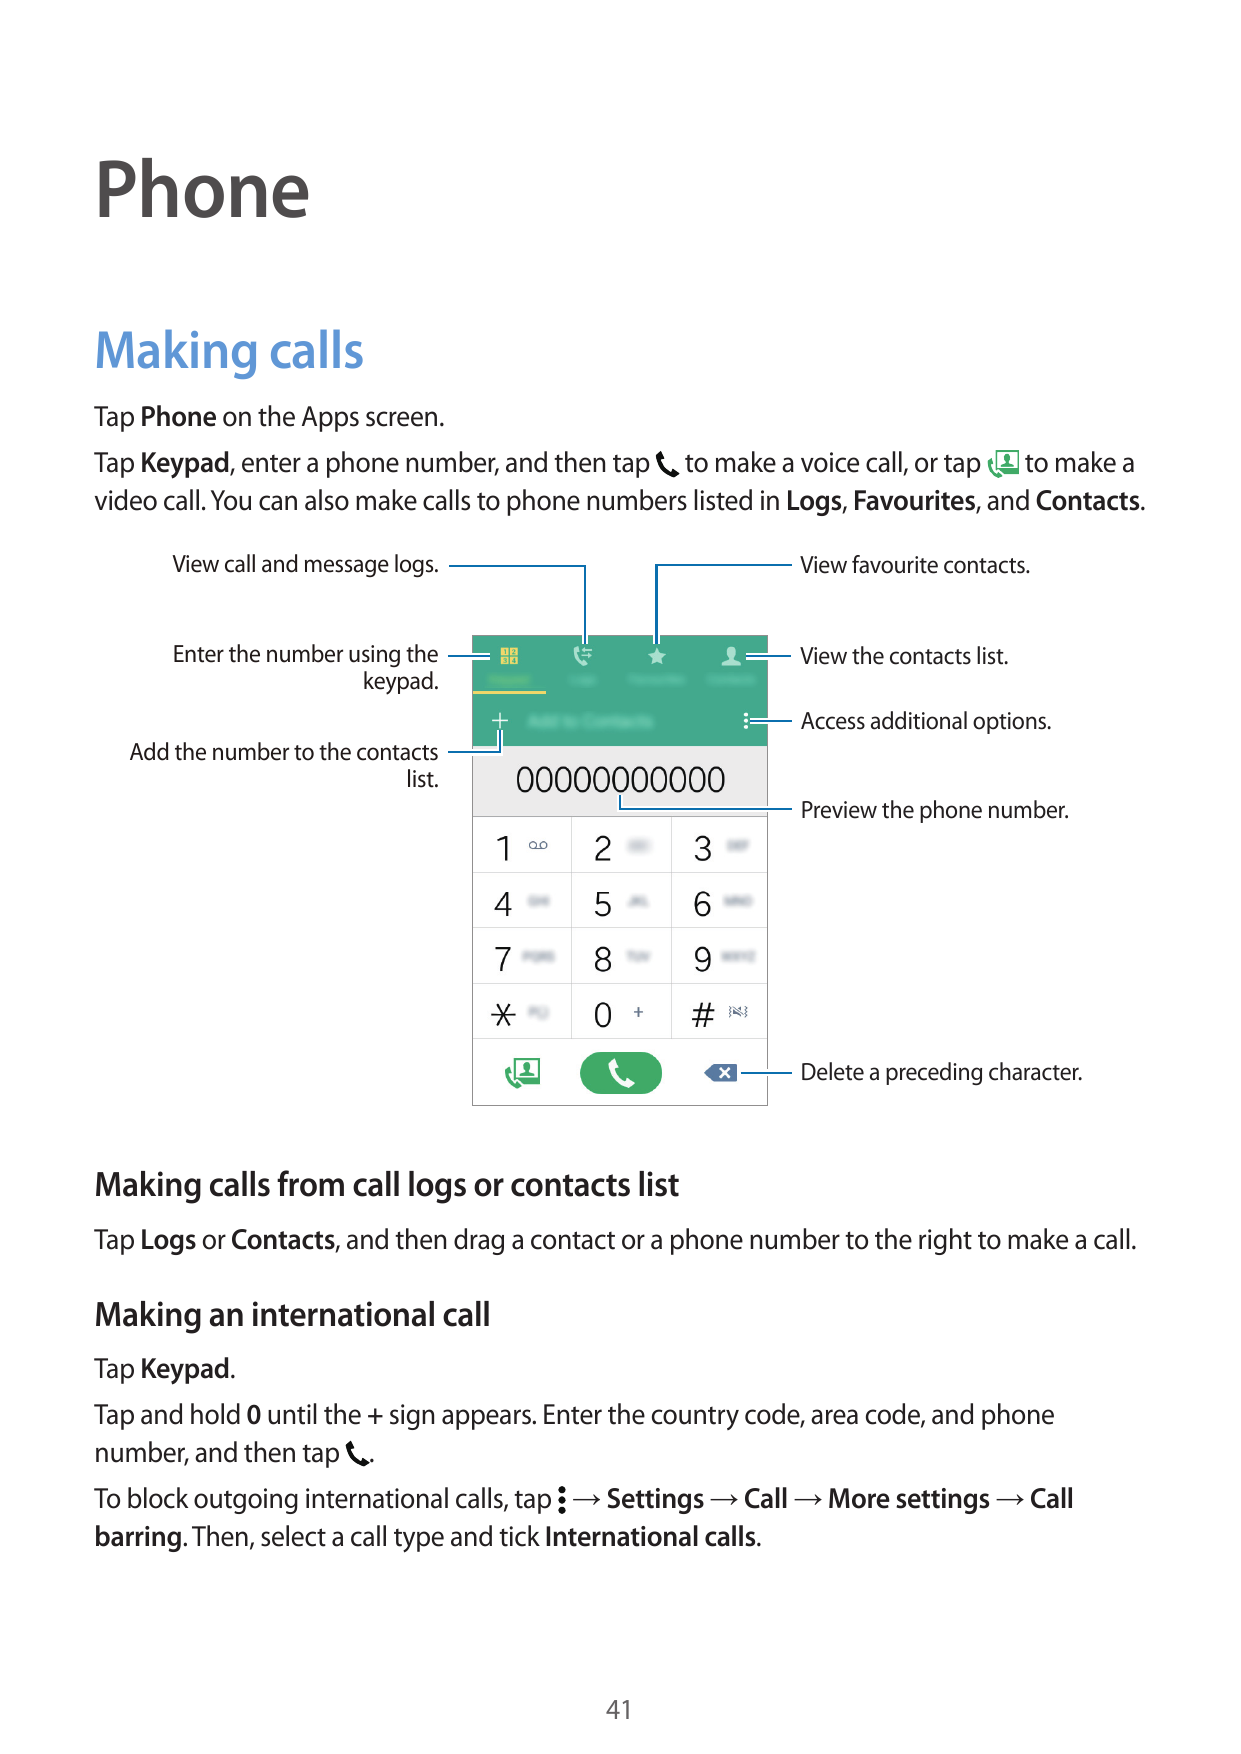 PhoneMaking callsTap Phone on the Apps screen.Tap Keypad, enter a phone number, and then tap to make a voice call, or tap to mak